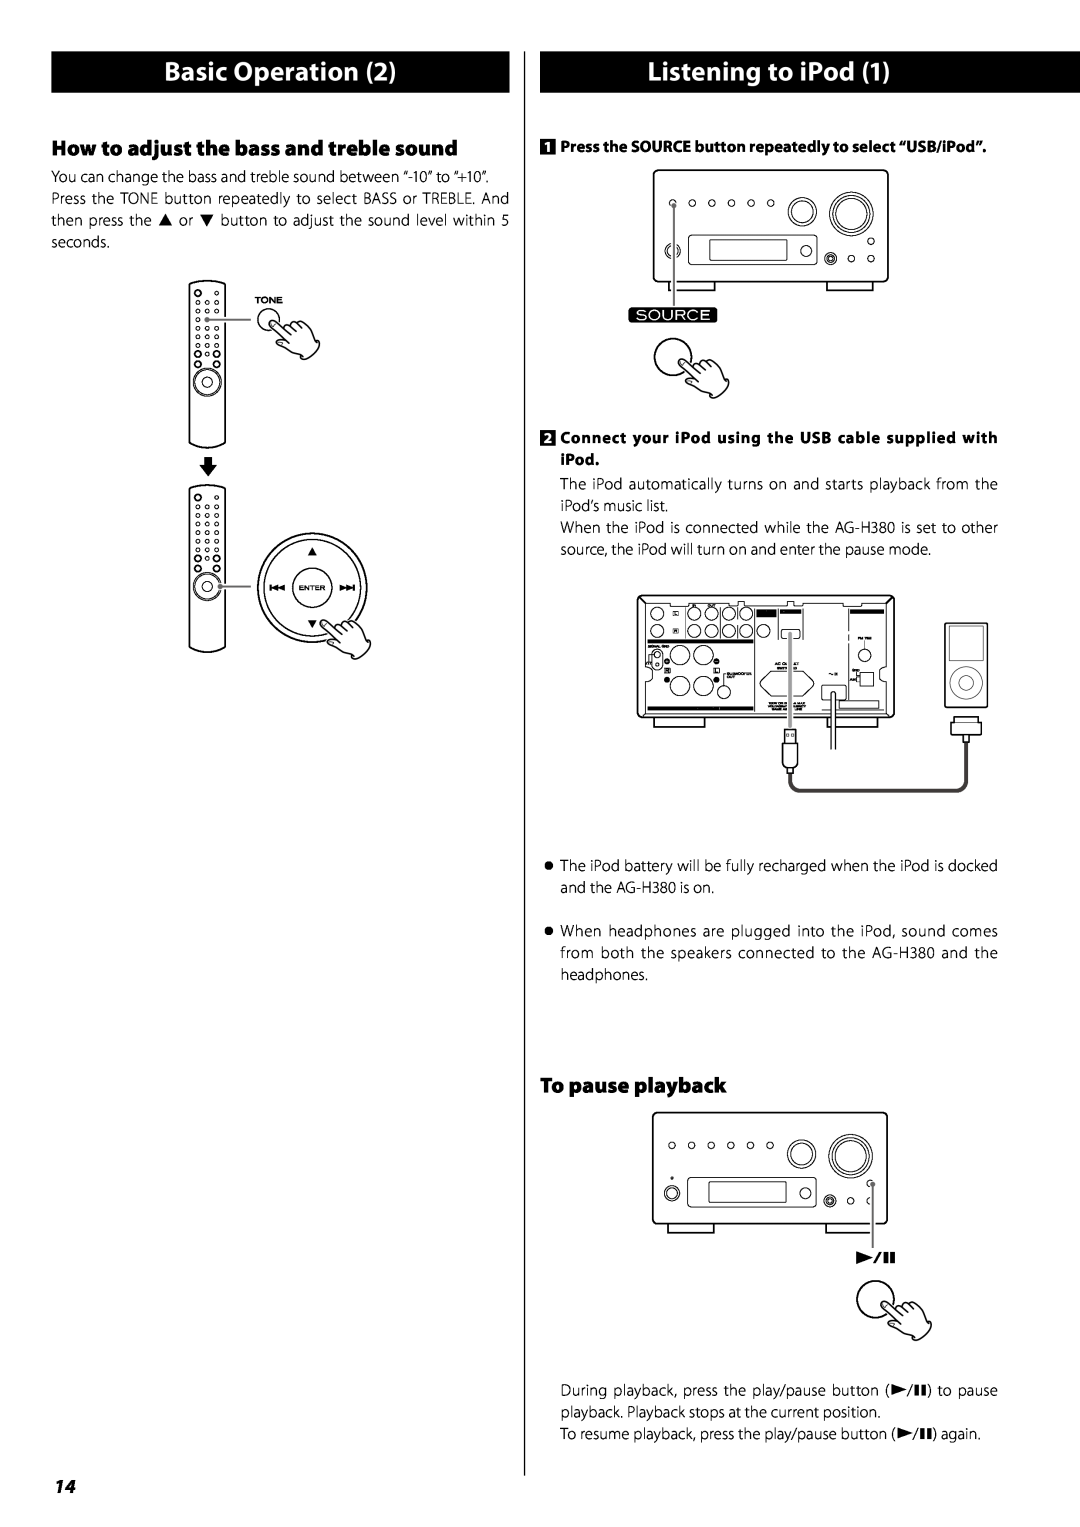 Teac AG-H380 owner manual Listening to iPod, How to adjust the bass and treble sound, To pause playback, Basic Operation 